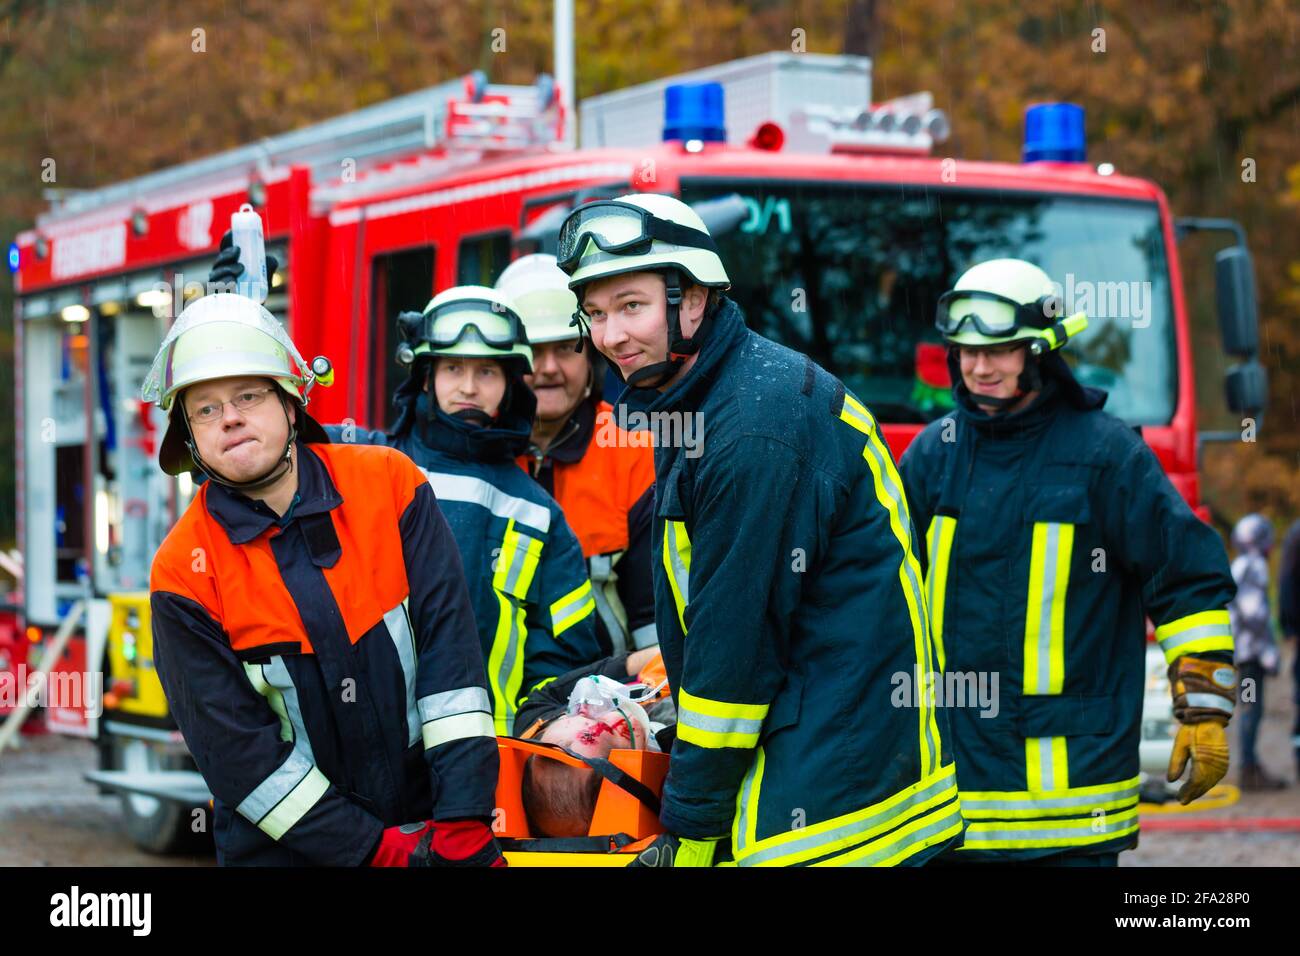 Accident - Fire brigade and Rescue team pulling cart with wounded person wearing a neck brace and respirator Stock Photo